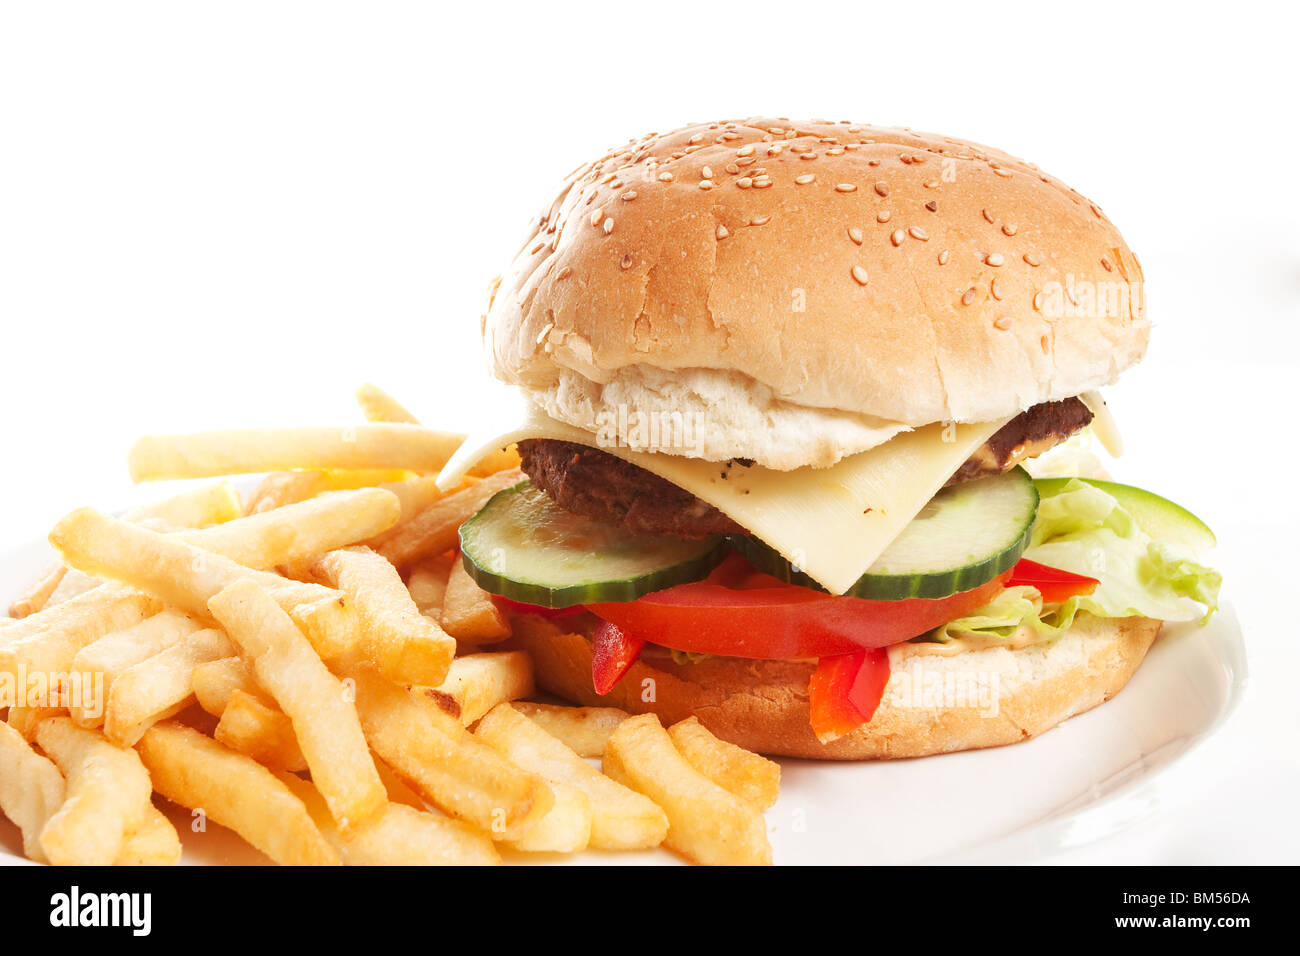 Hamburger with french fries on a dinner plate Stock Photo